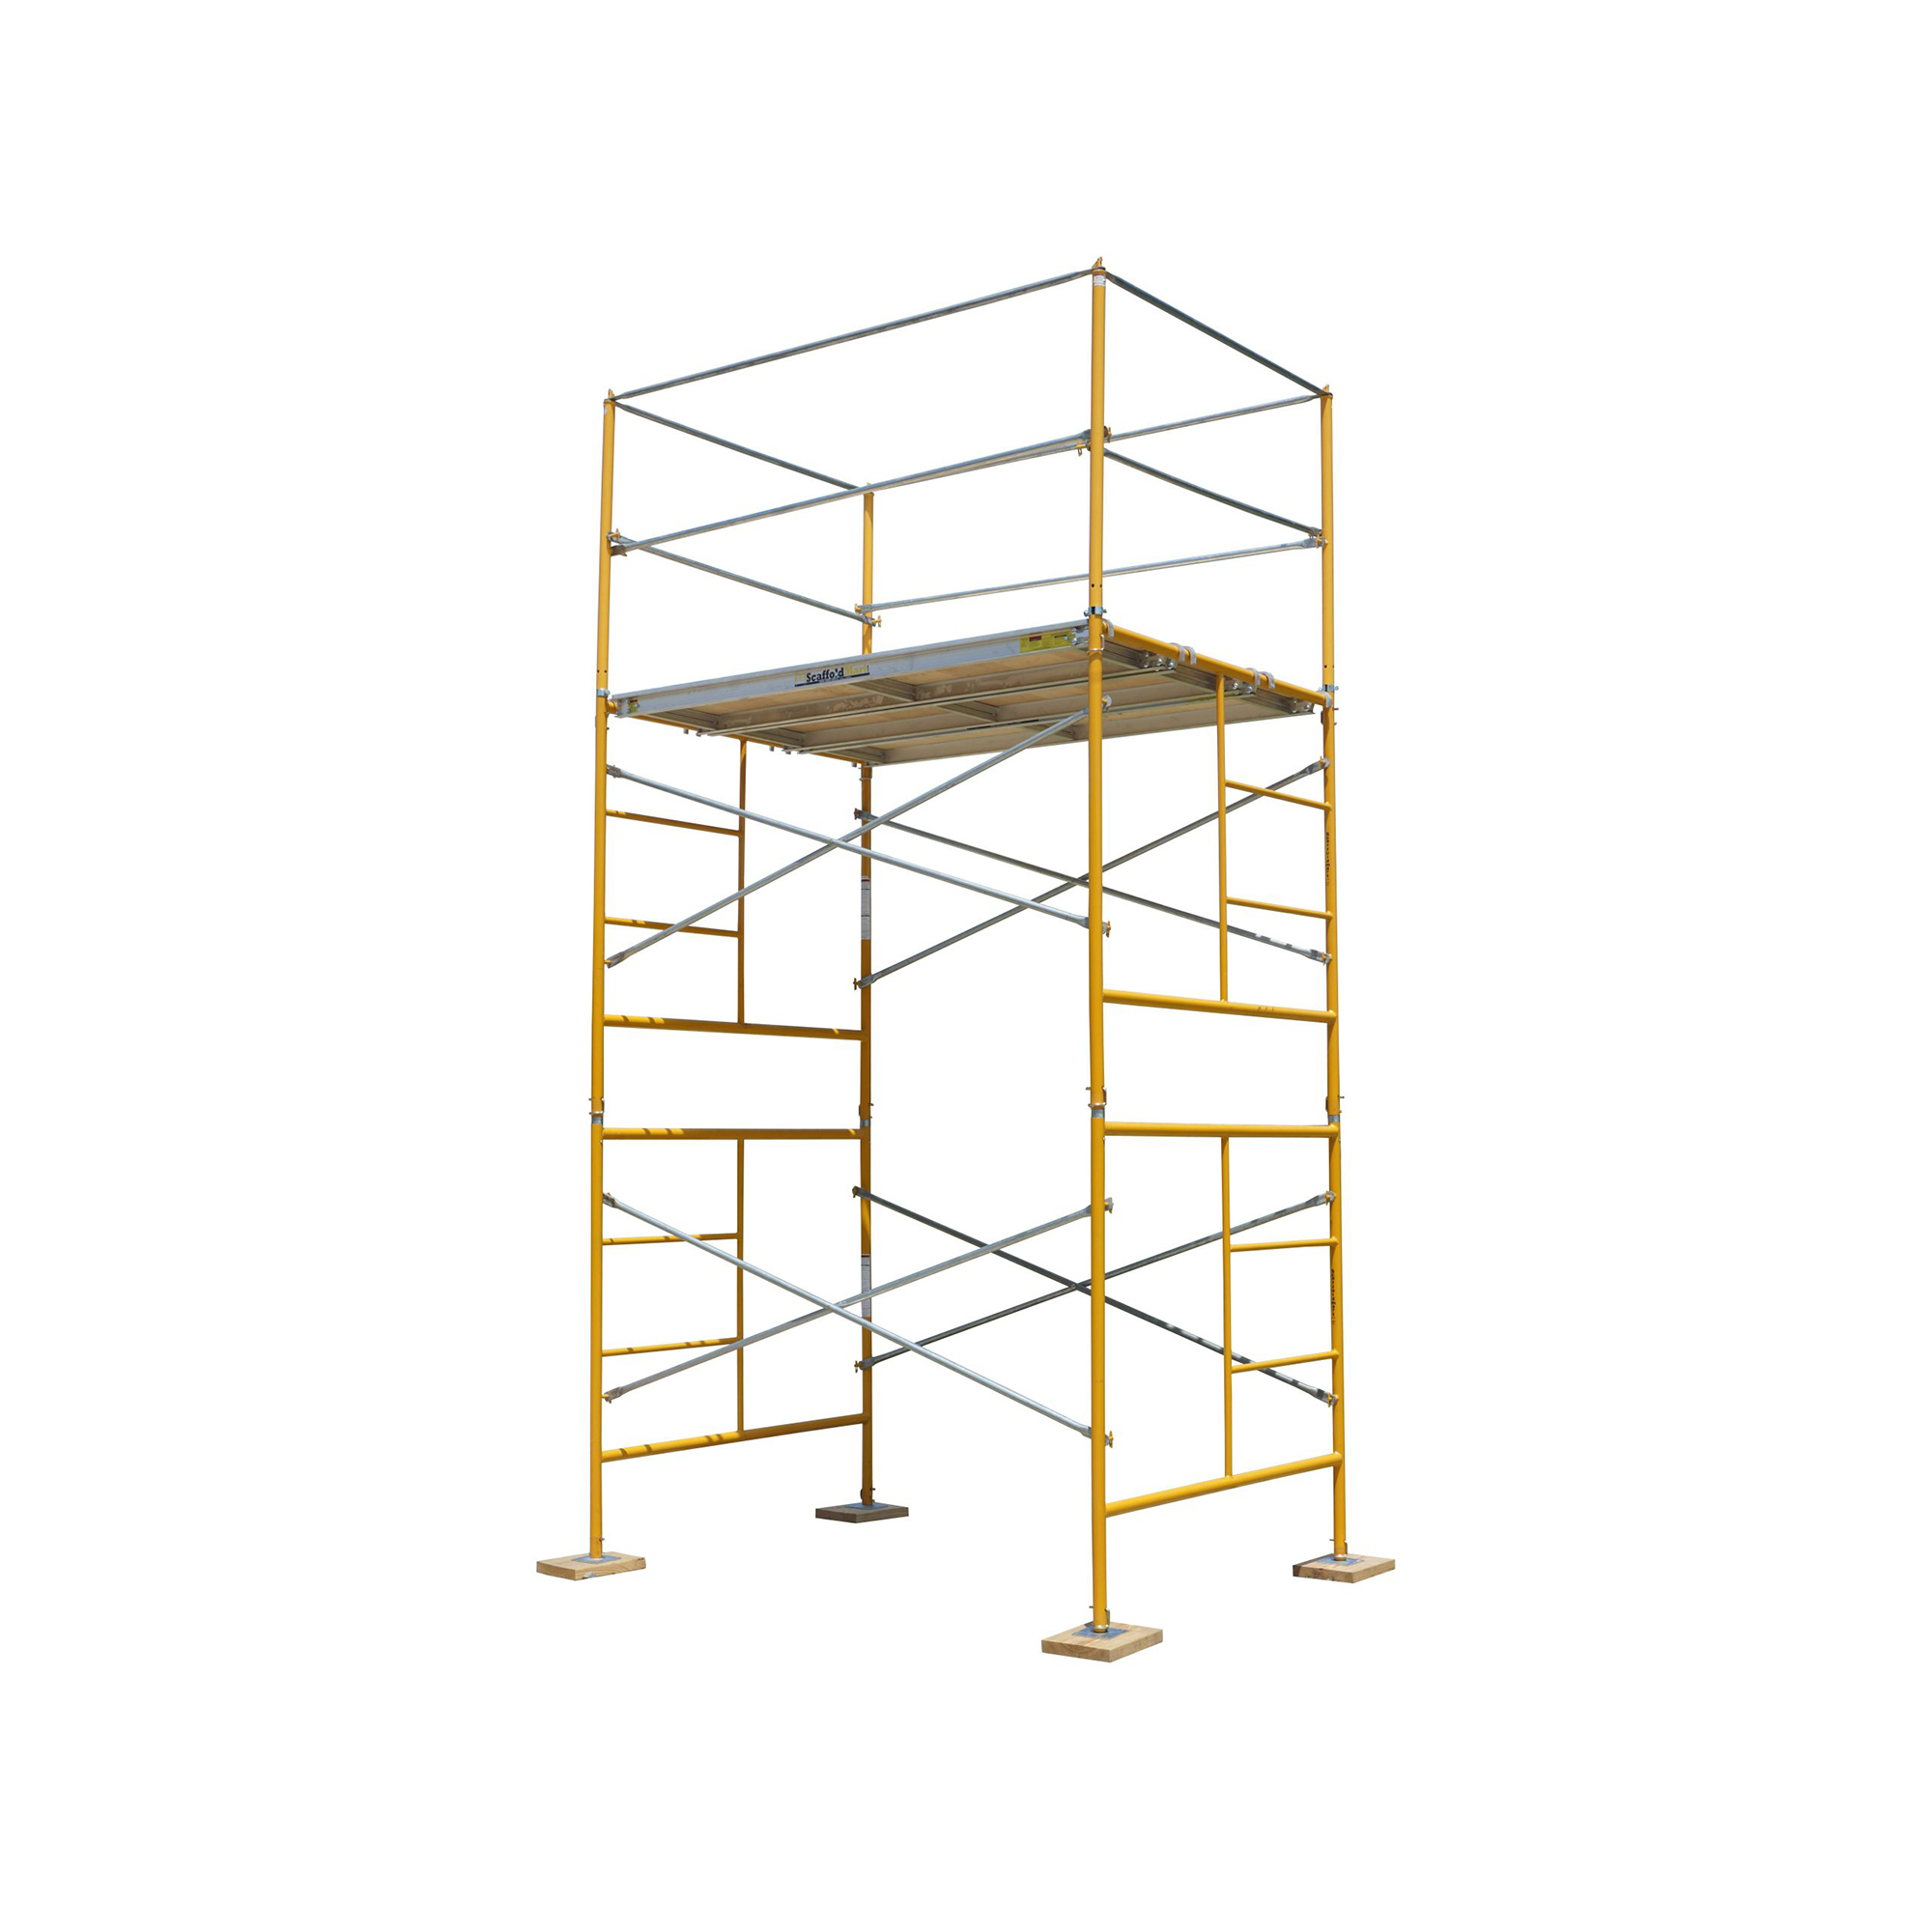 ScaffoldMart, 11ft. Stationary Tower Package, Capacity 2480 lb, Frame Material Steel, Max. Platform Height 5 ft, Model BB11S